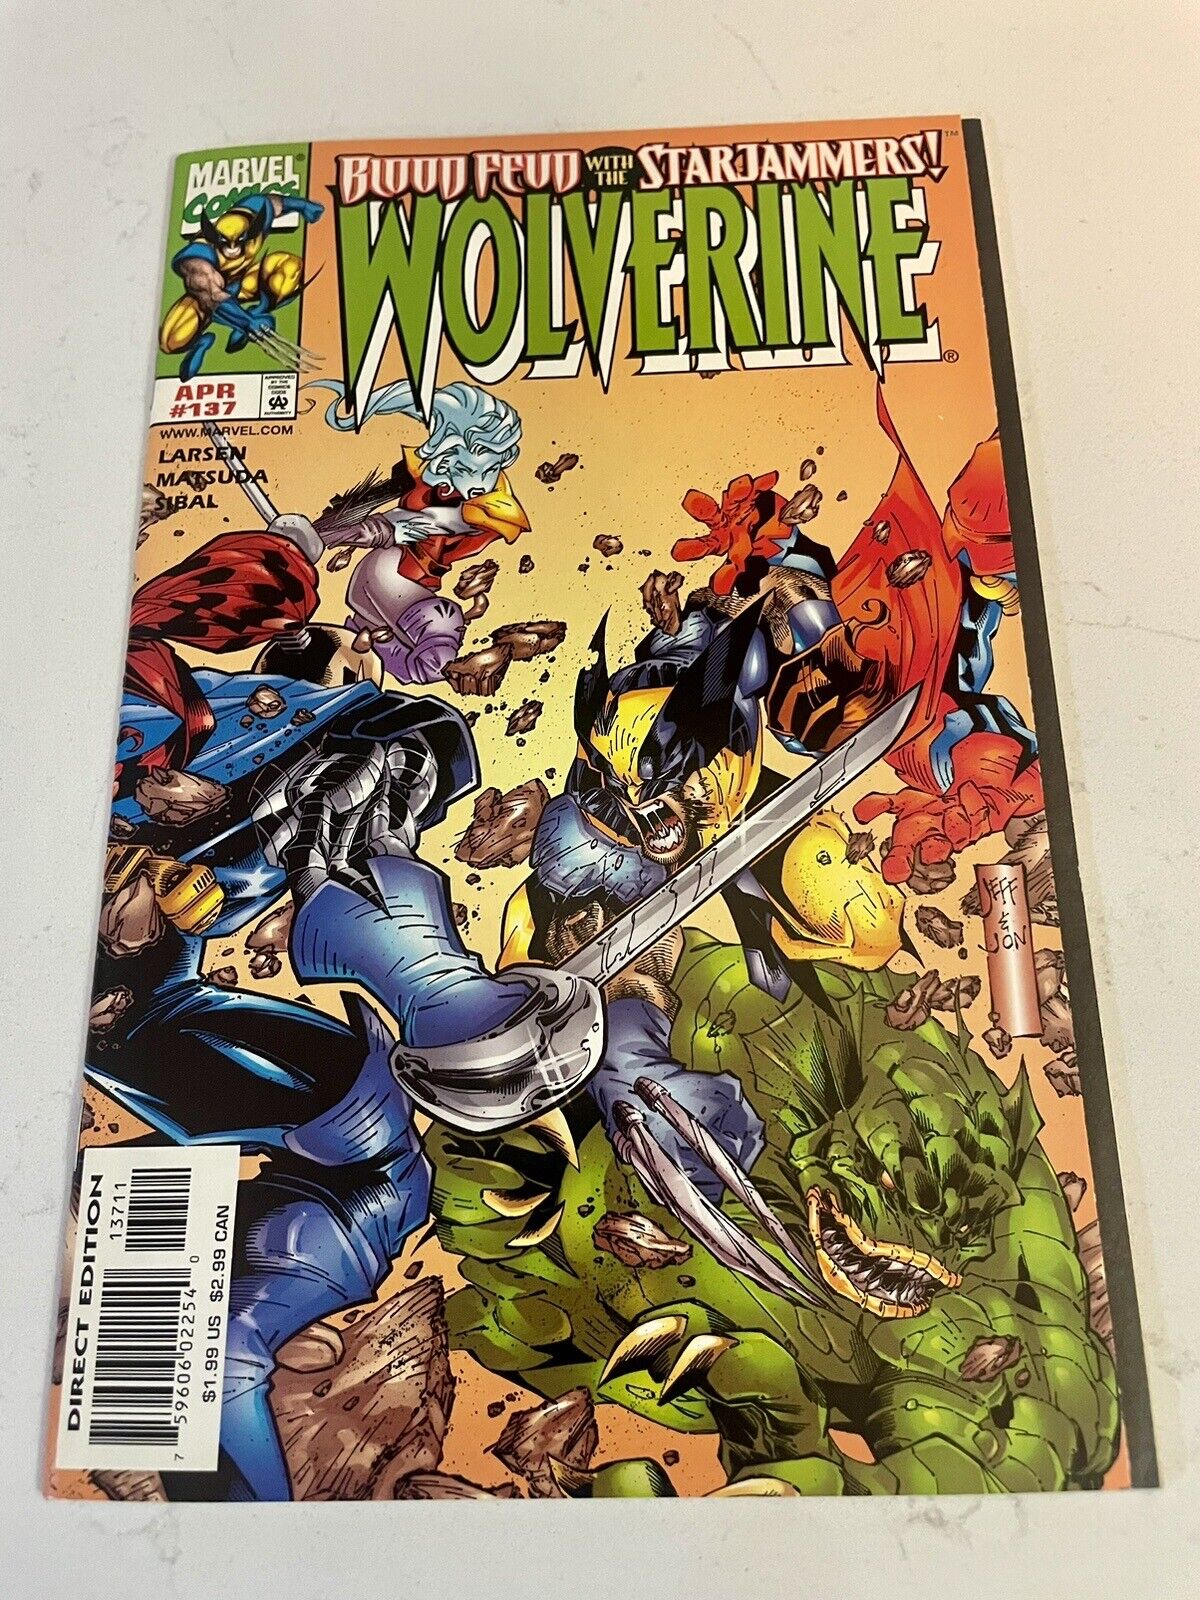 Marvel Wolverine #137 1999 Blood Feud with the Star Jammers